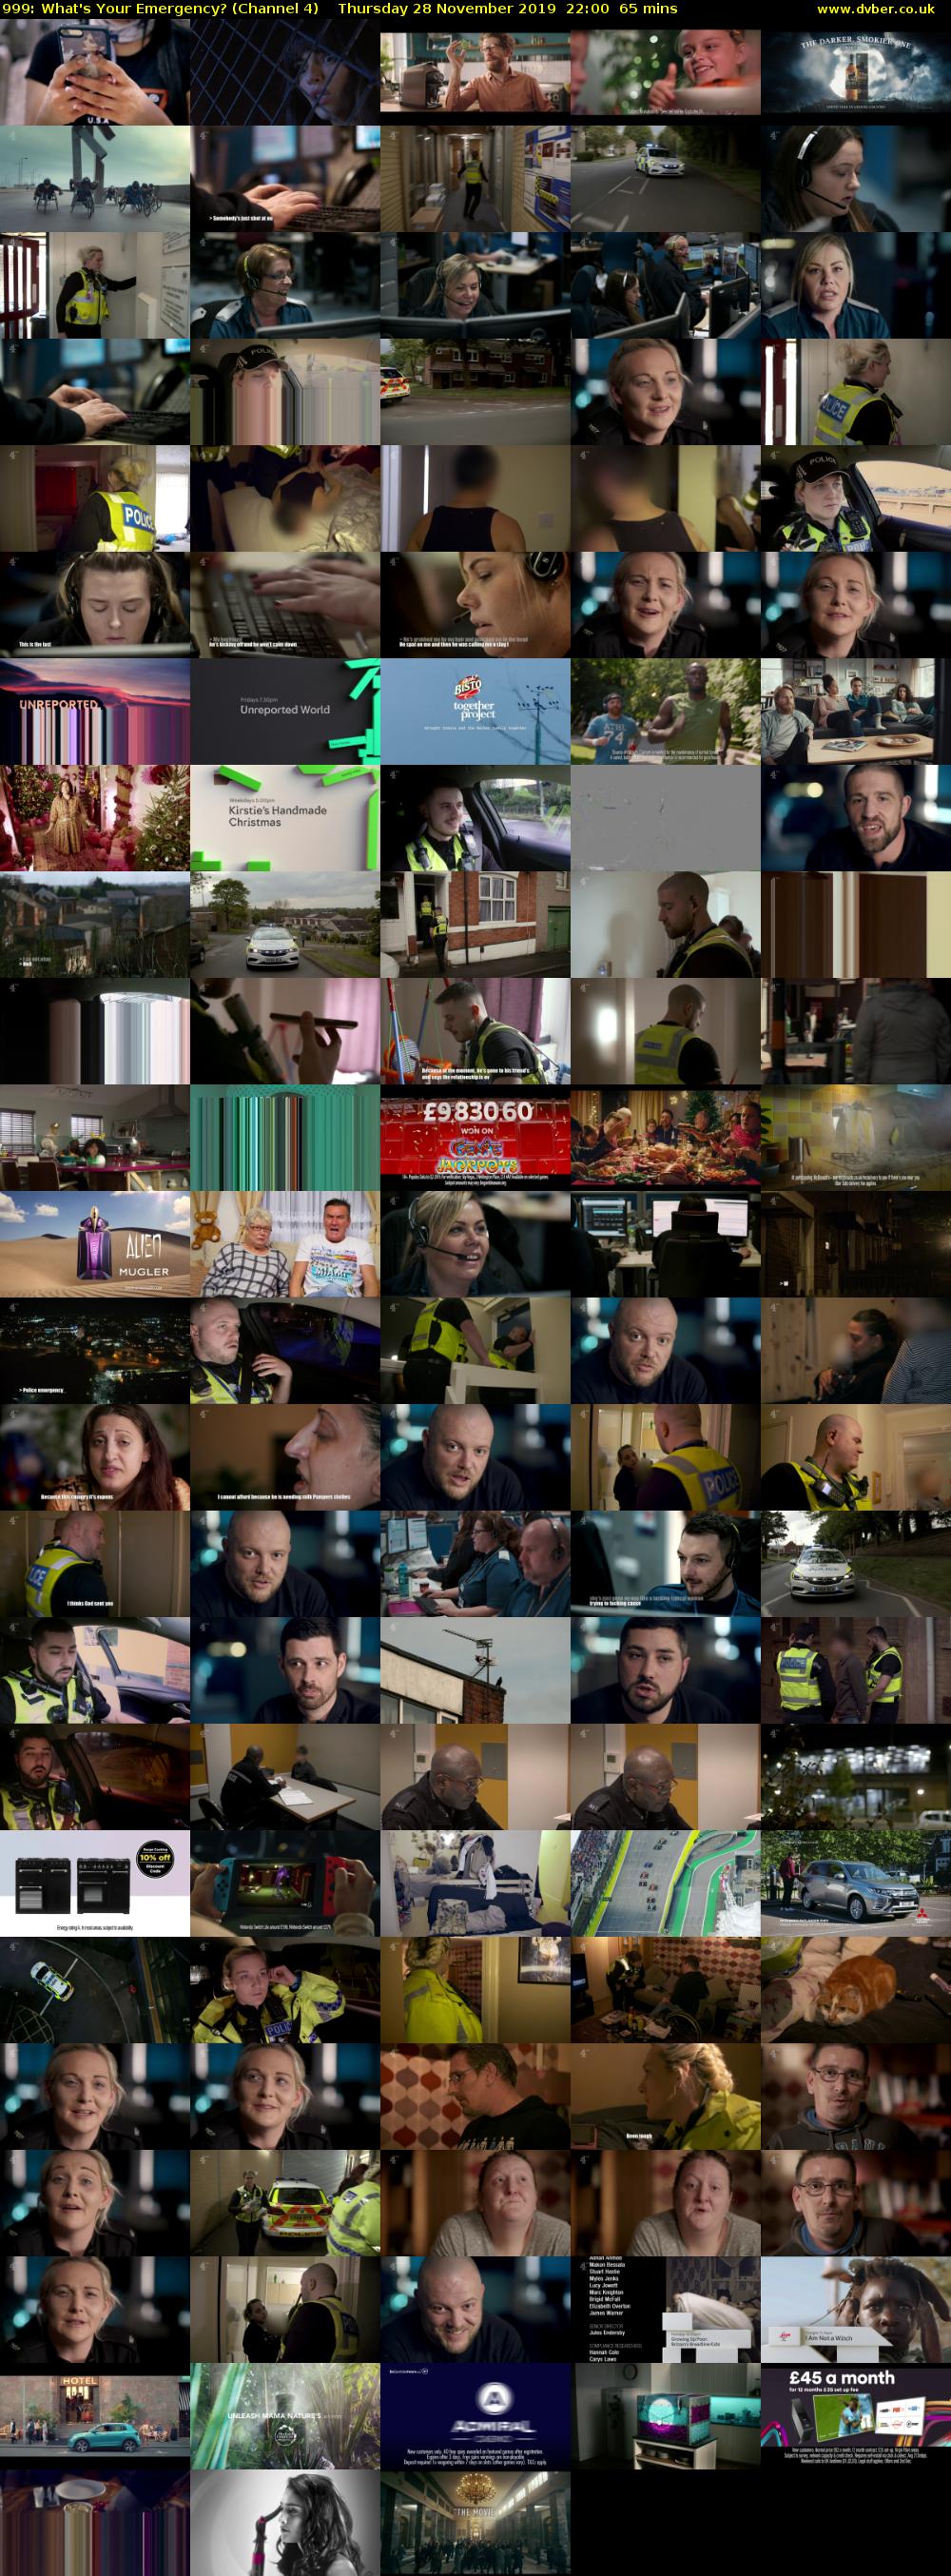 999: What's Your Emergency? (Channel 4) Thursday 28 November 2019 22:00 - 23:05